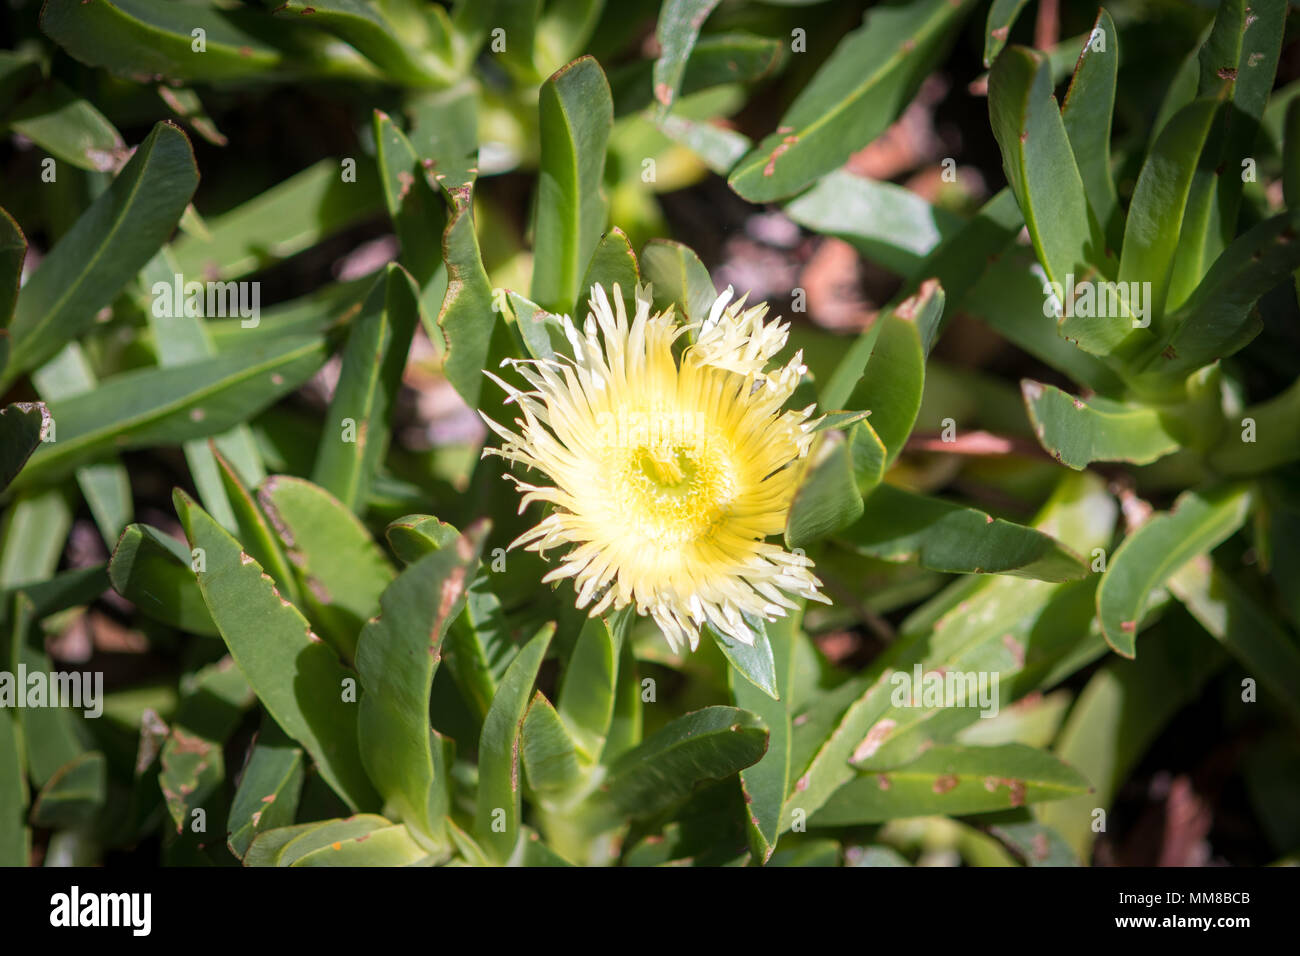 A flowering Carpobrotus edulis at the Kirstenbosch Botanical Gardens in Cape Town, South Africa Stock Photo